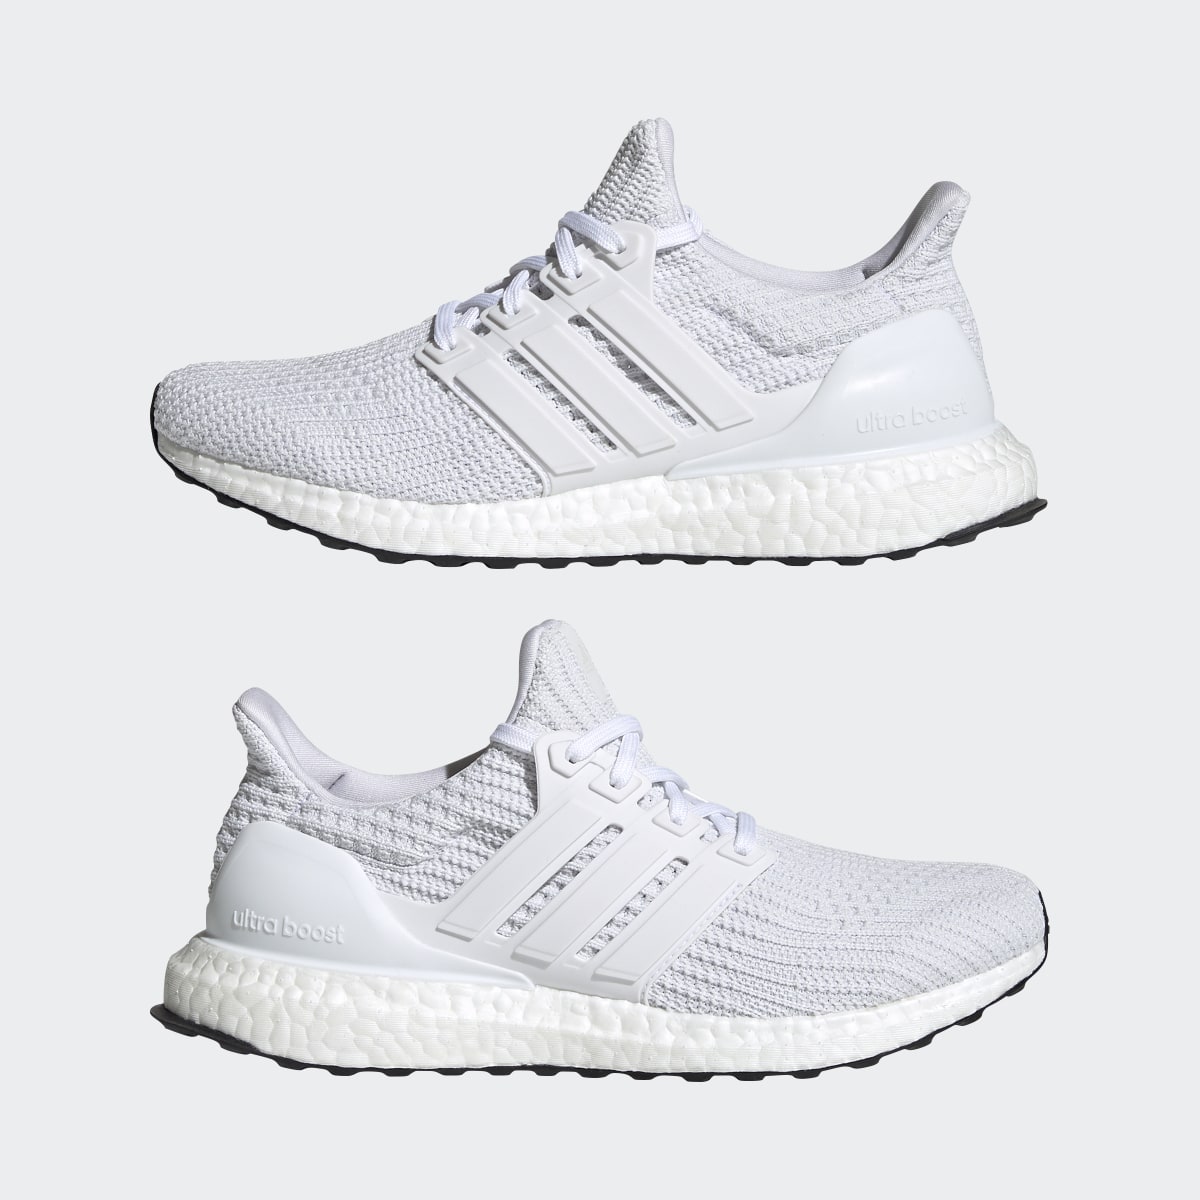 Adidas Ultraboost 4.0 DNA Shoes. 9